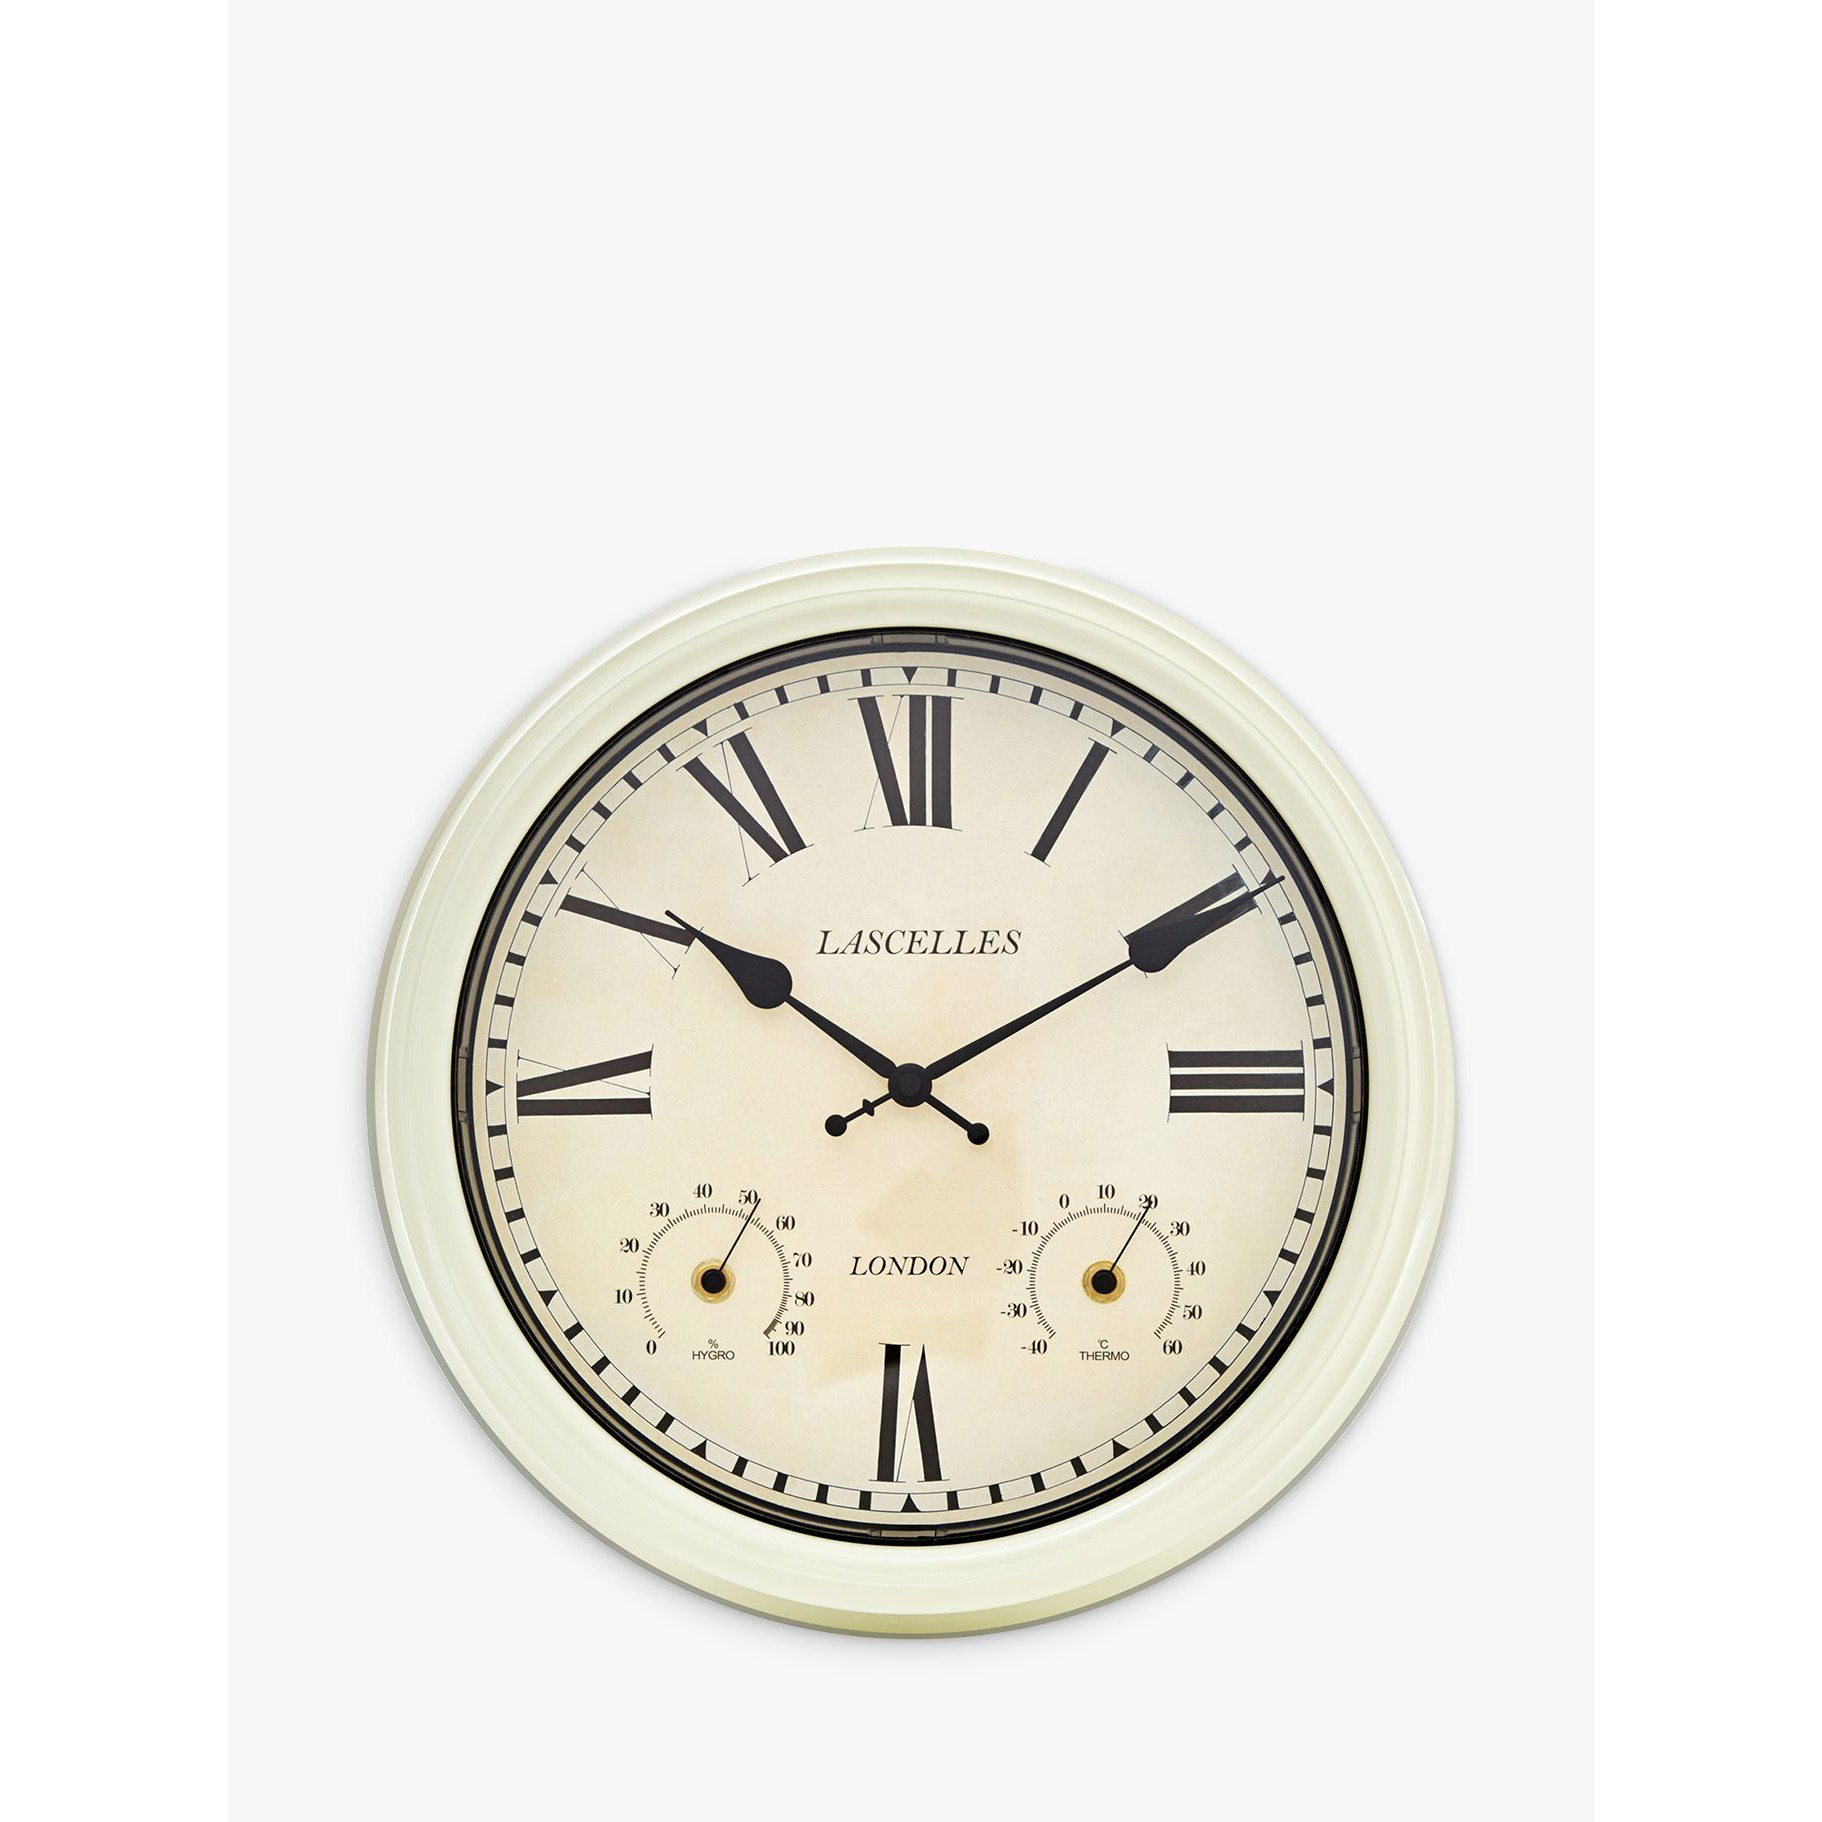 Brookpace Lascelles Roman Numeral Outdoor Wall Clock with Temperature & Humidity, 36cm, Cream - image 1